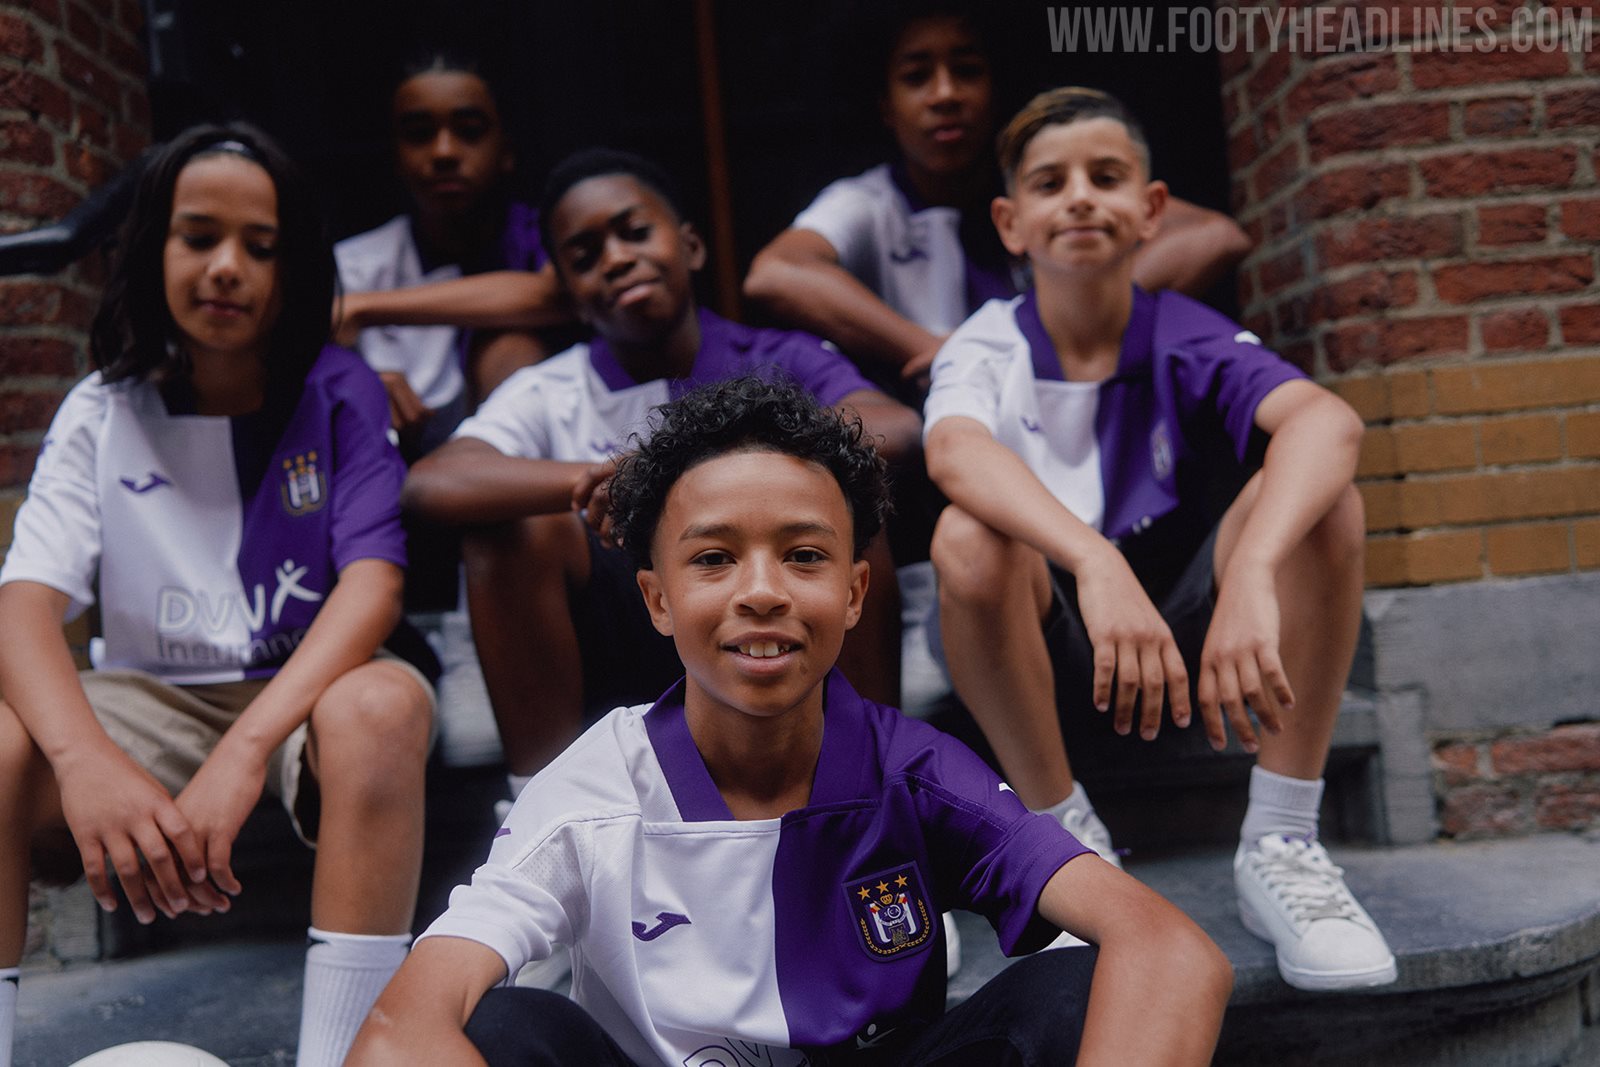 Anderlecht Home Shirt 2023/24, Official Joma Product